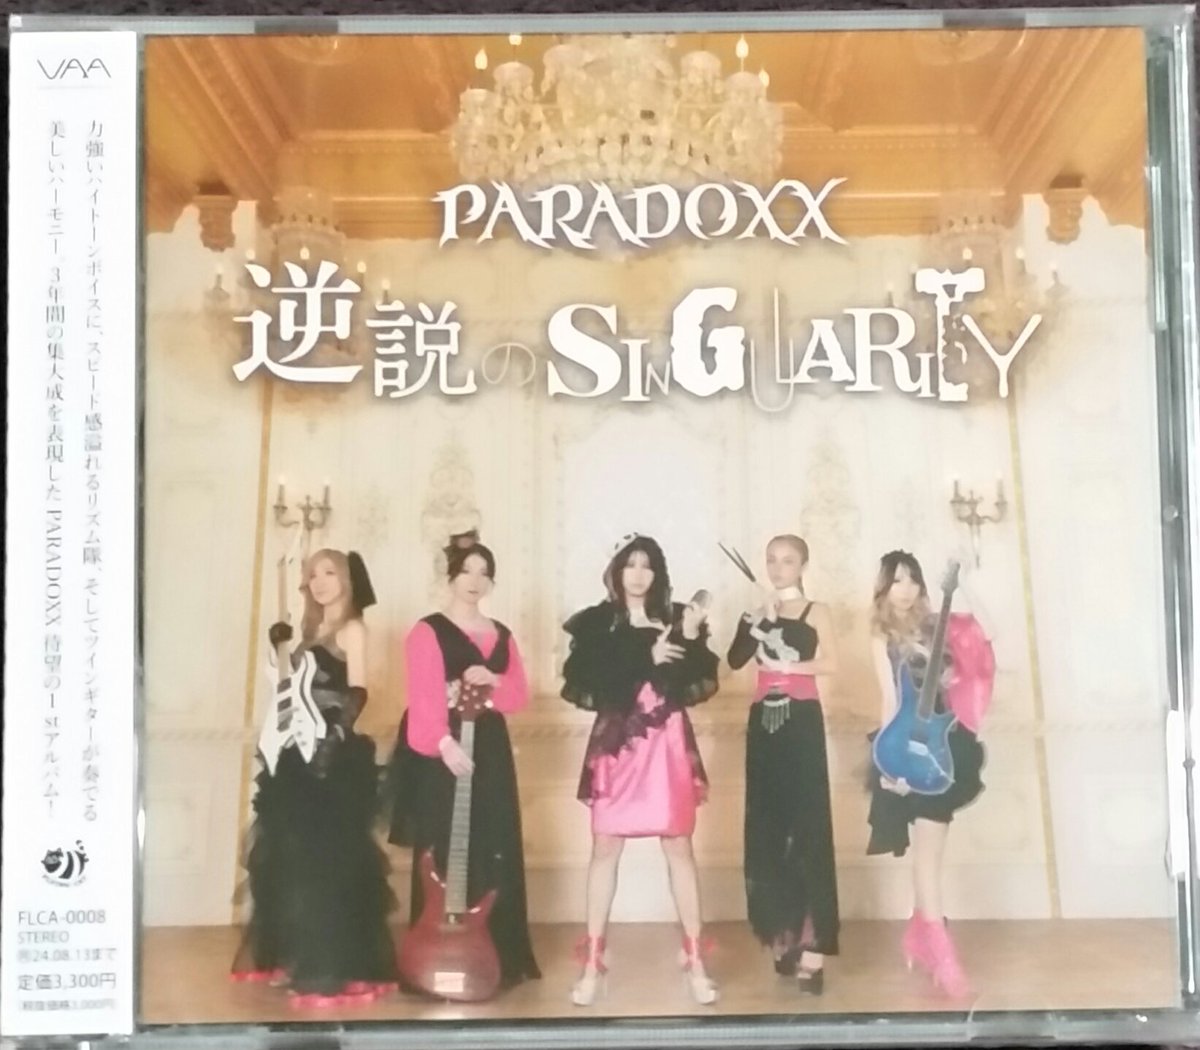 Thanks to @CDJapan for the latest releases from #GacharicSpin EP #Ace plus a Blu-ray of a Live 2023 Performance. #Paradoxx with their first album #Singularity #Japan #jmetal #jrock #femalebands #femaleartists